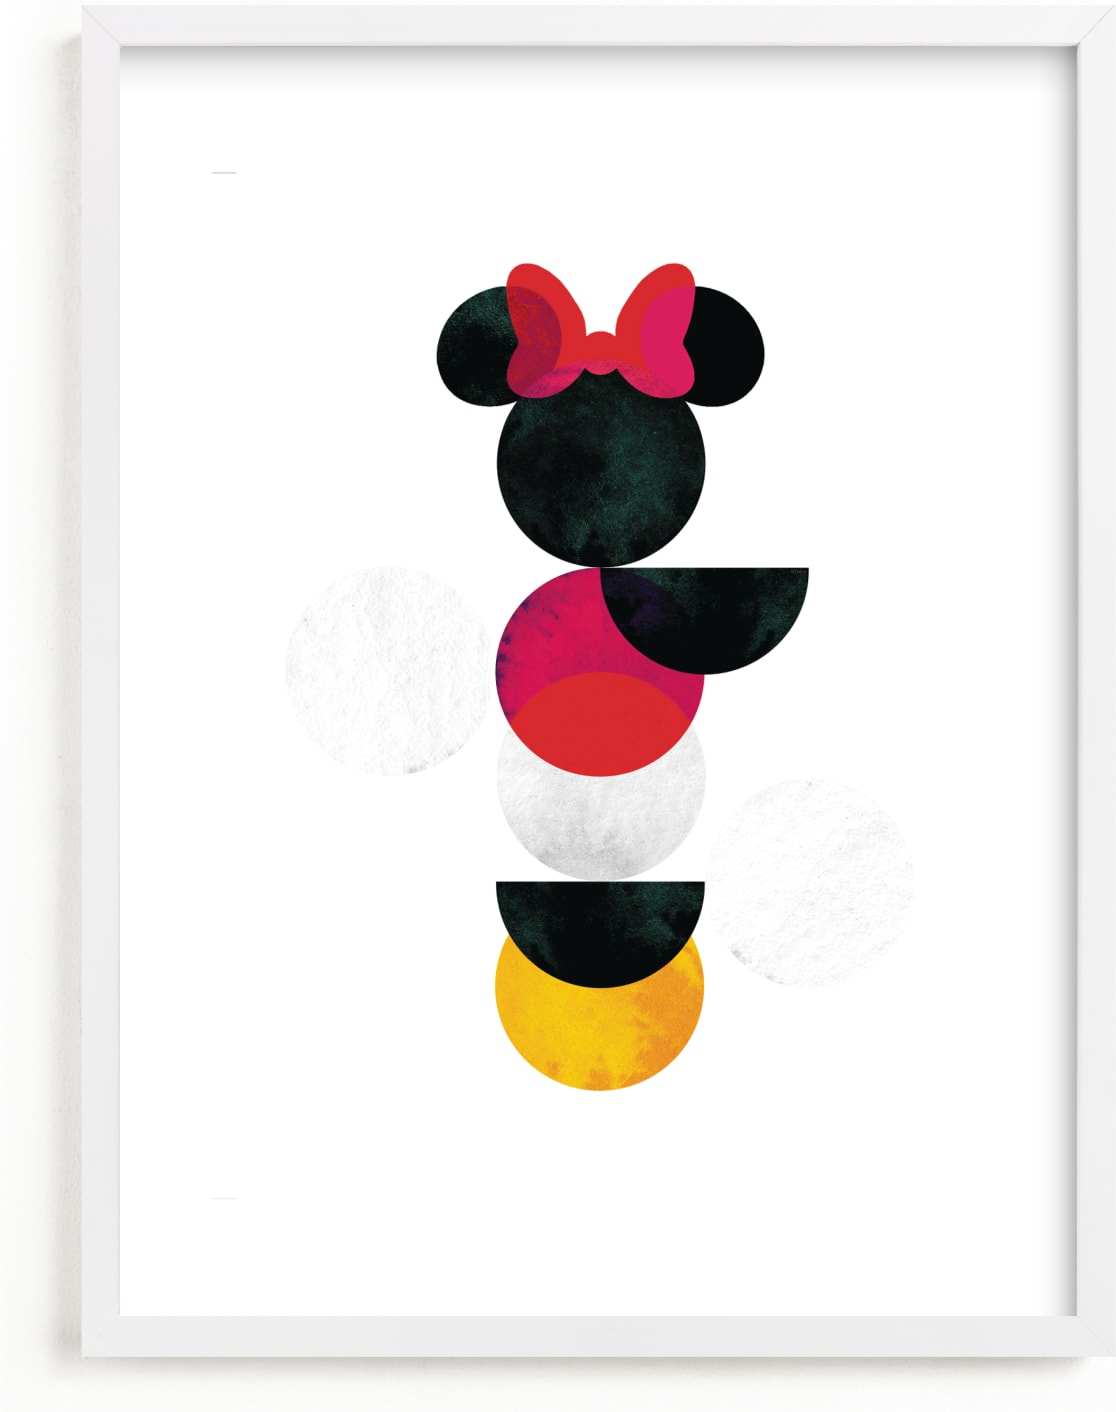 This is a yellow, black, red disney art by Anna Joseph called Disney Minimalist Minnie Mouse.